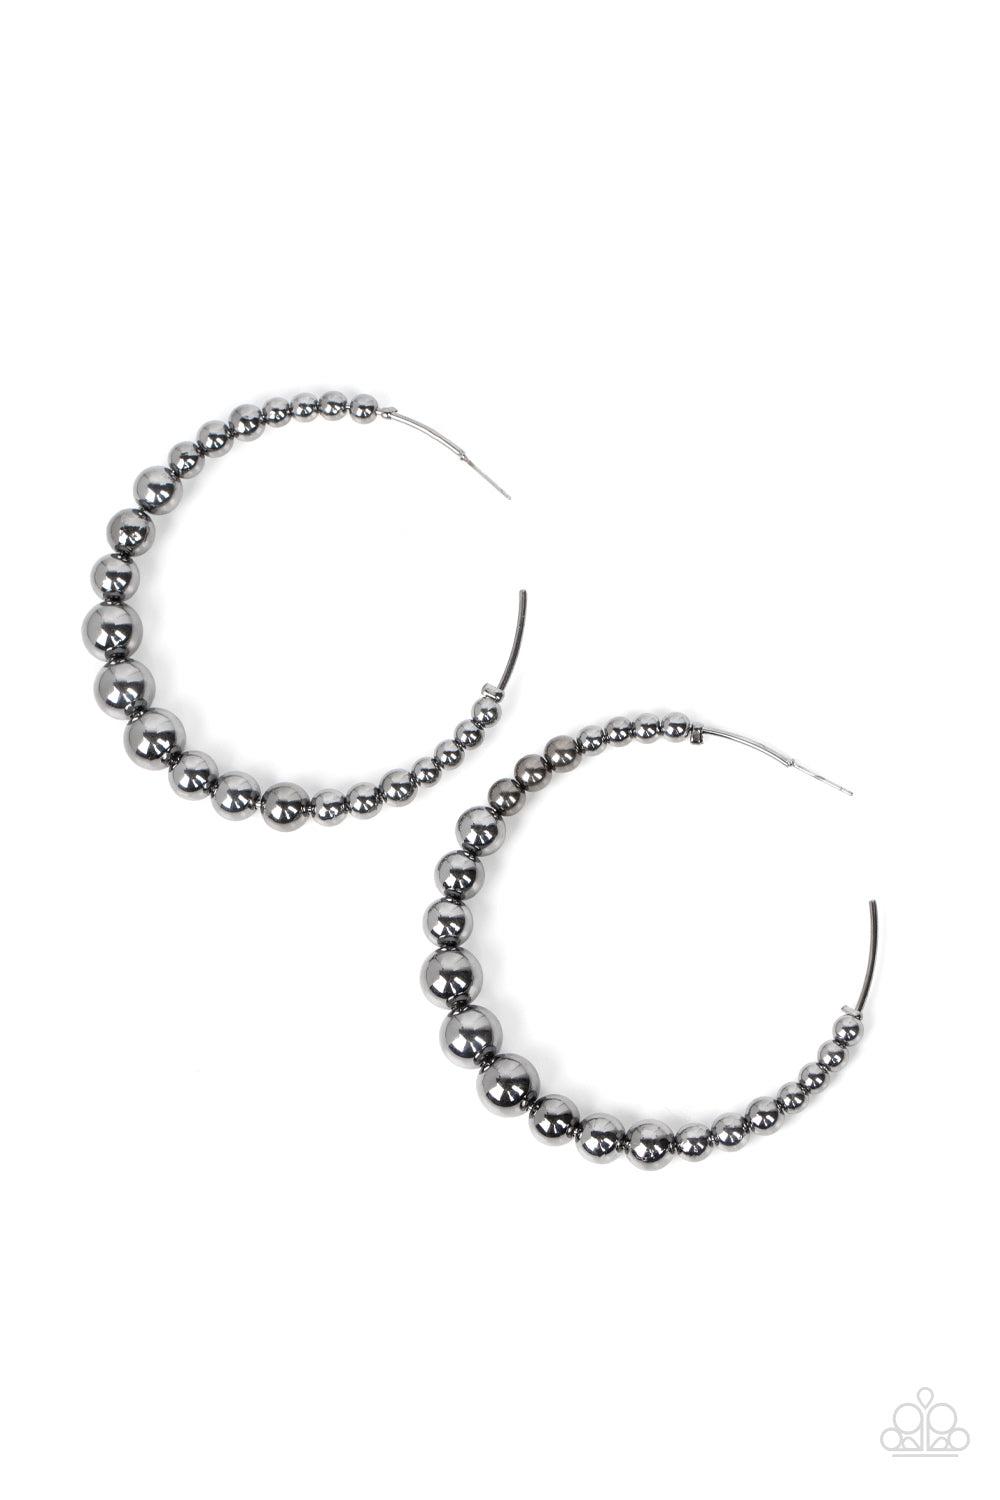 Show Off Your Curves Gunmetal Black Hoop Earrings - Paparazzi Accessories- lightbox - CarasShop.com - $5 Jewelry by Cara Jewels